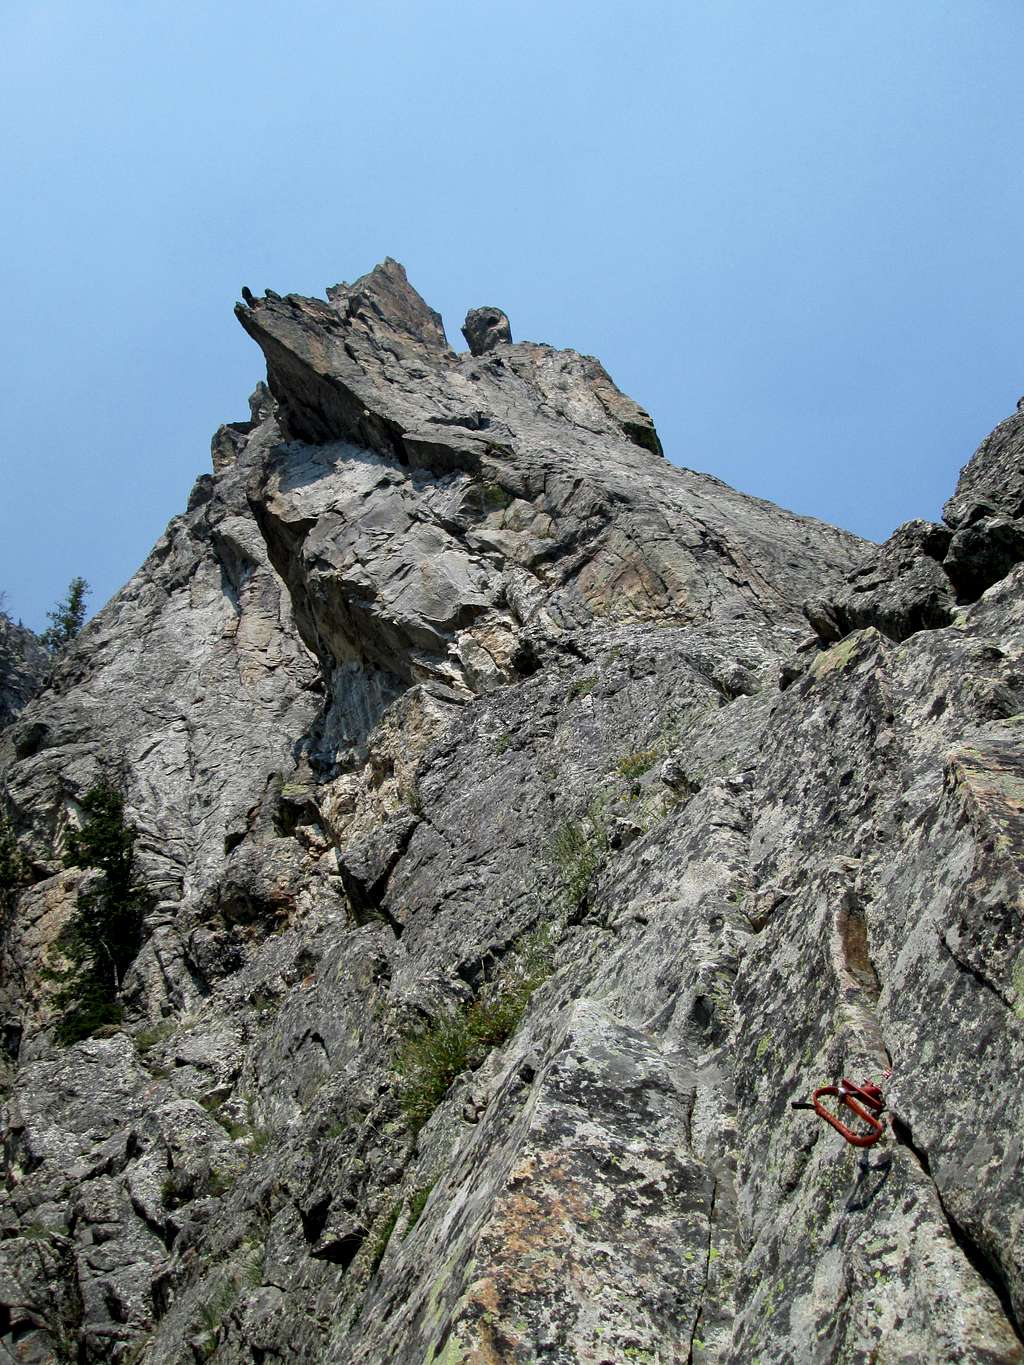 A link cam stuck in a crack on the first pitch of the South Ridge/Face of Baxter's Pinnacle, Teton Range, WY